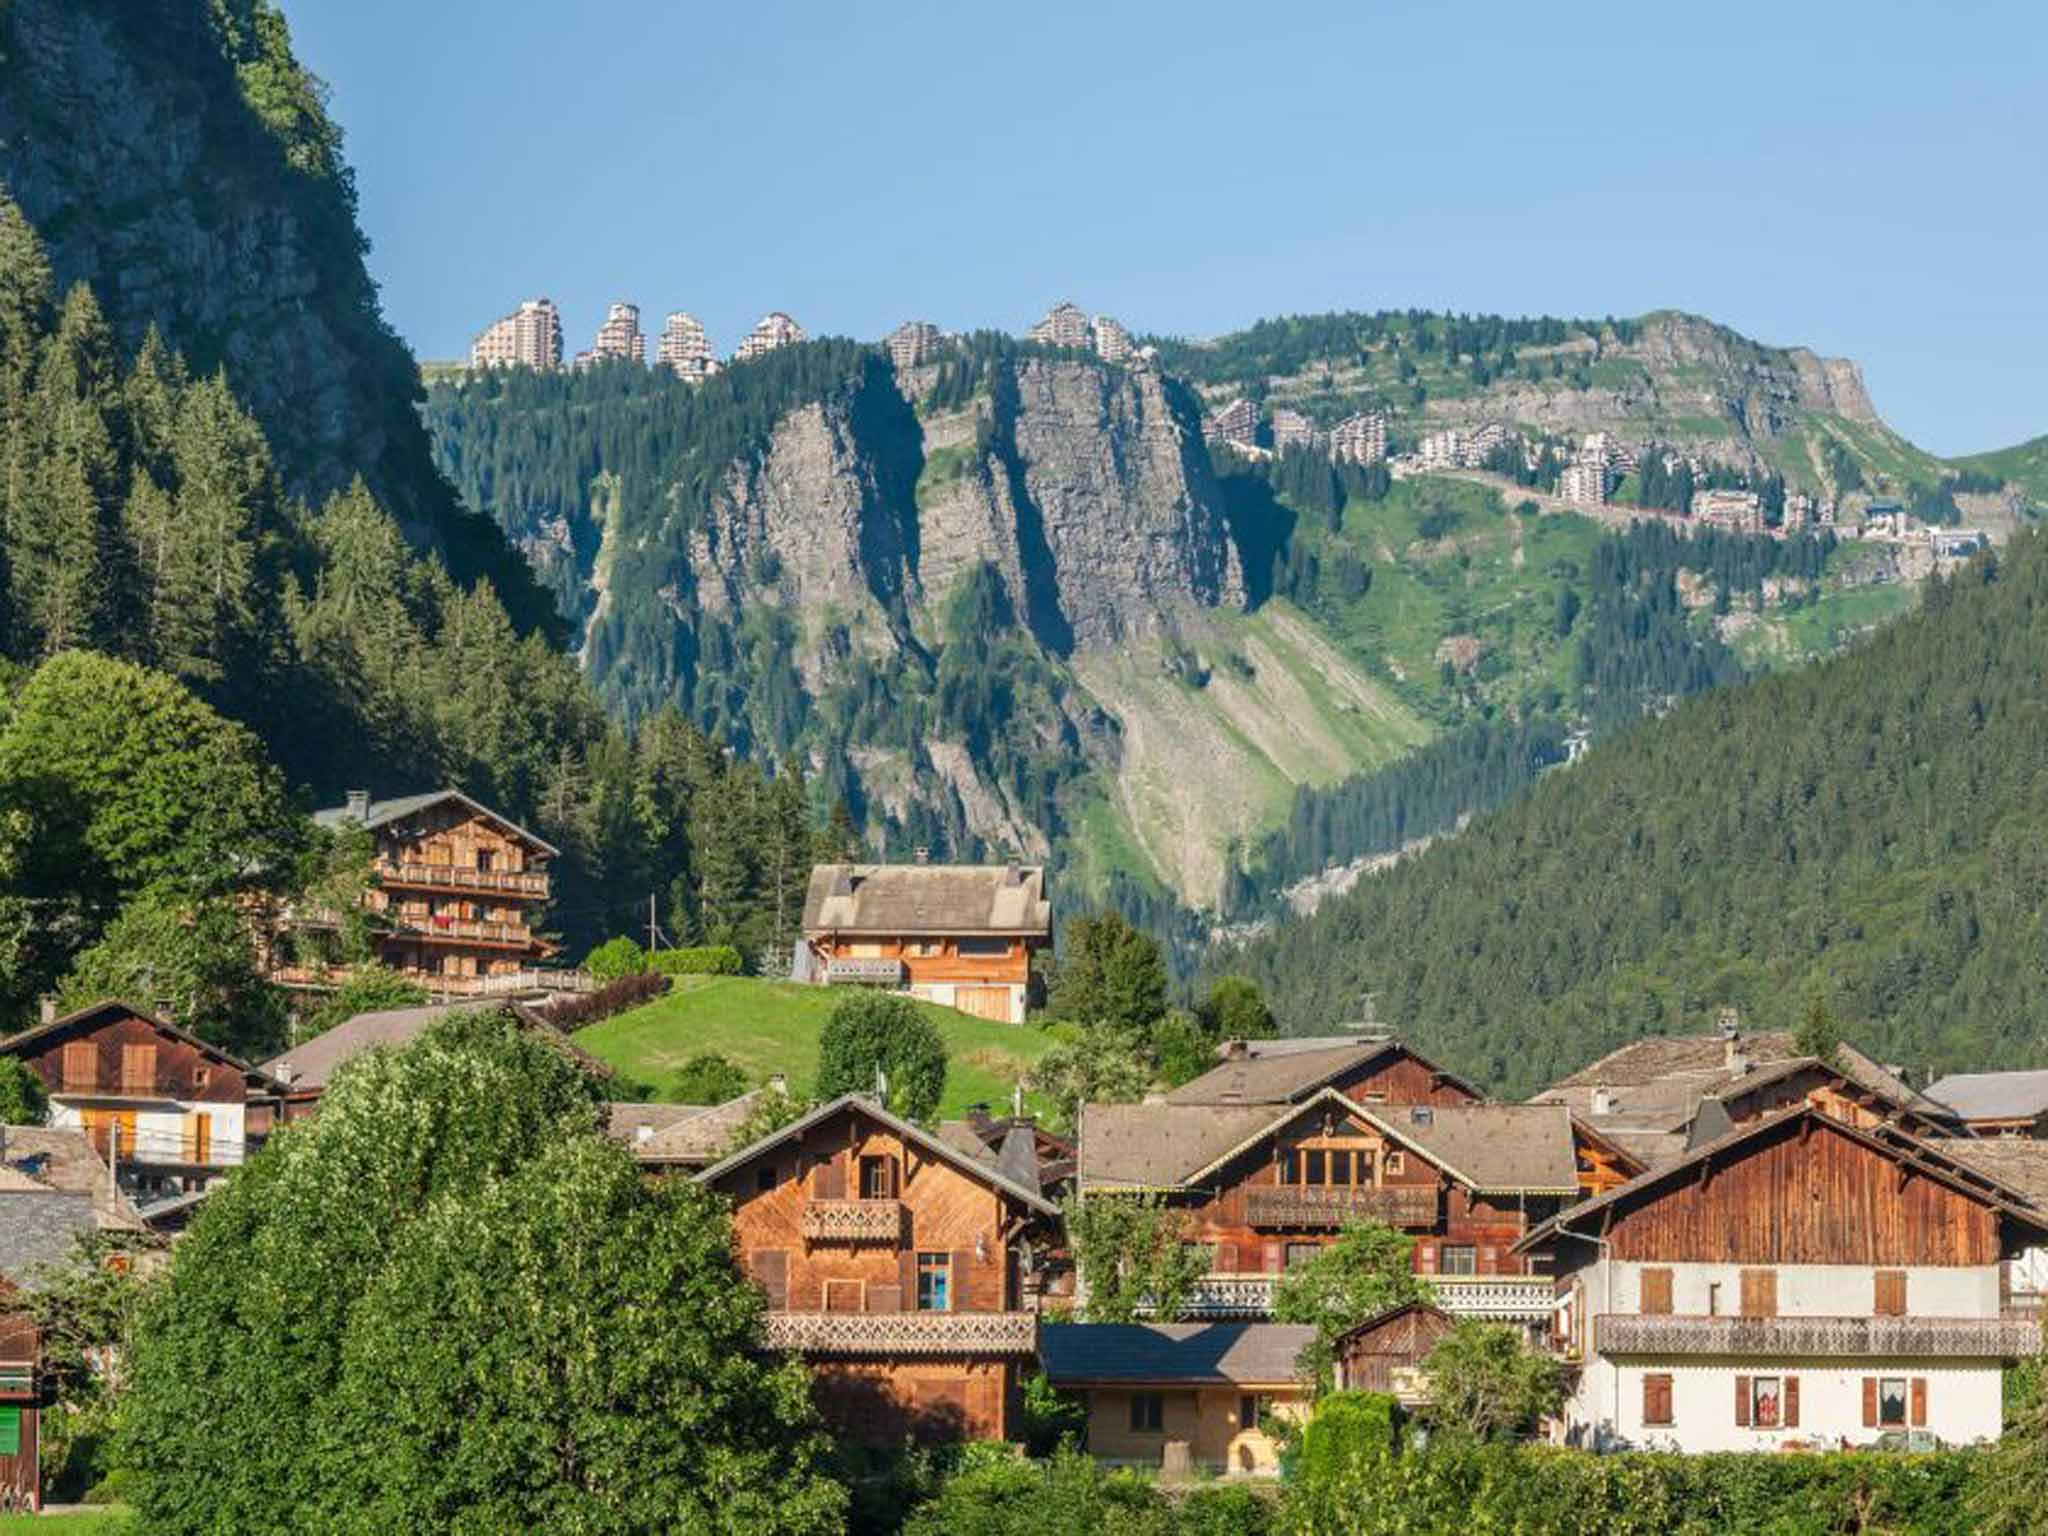 Family holiday in the Alps: Summer luge, pony treks, and outdoor